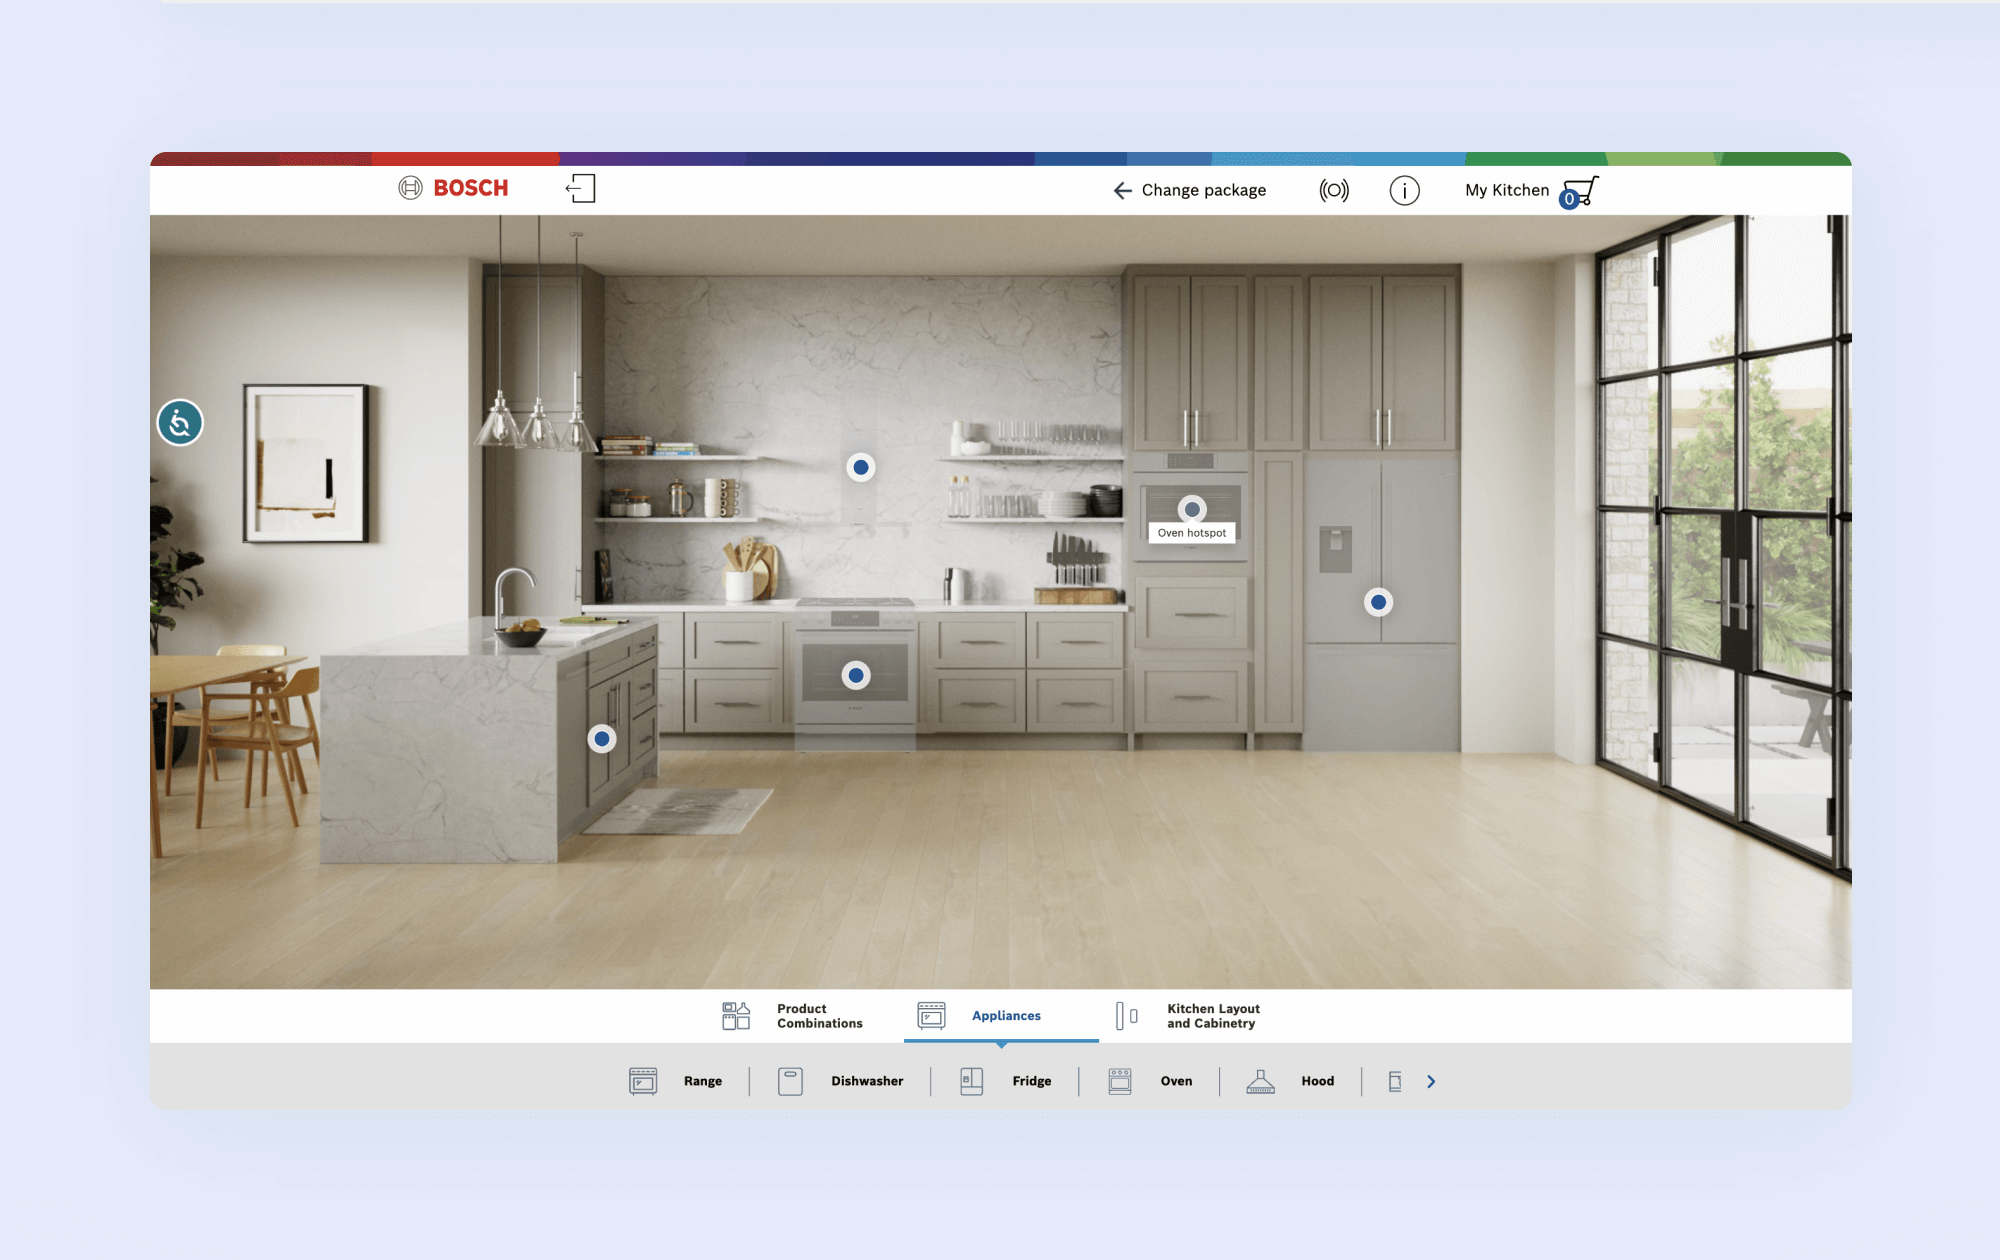 Virtual fittings in a kitchen